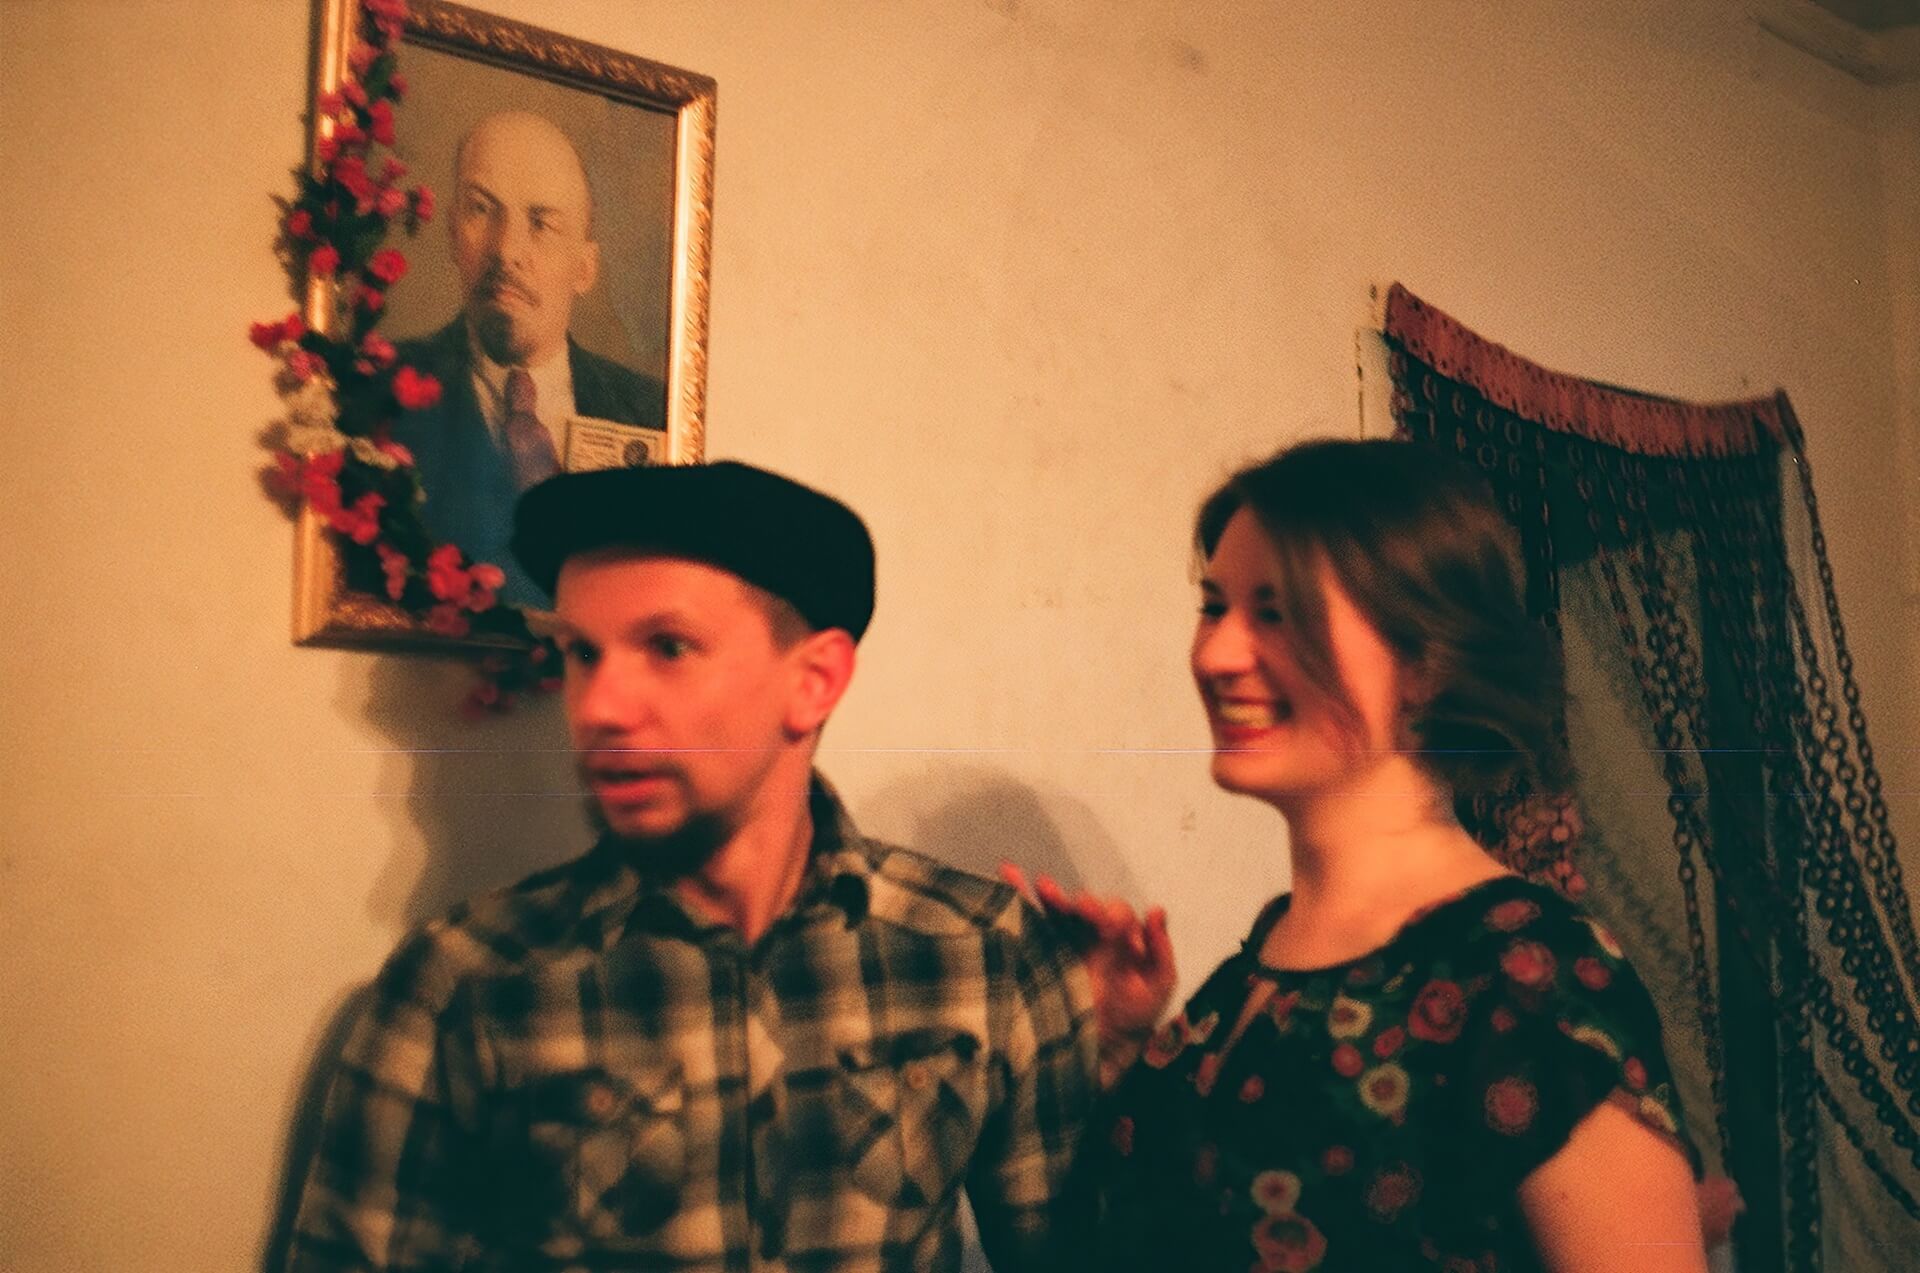 Two people standing in front of a portrait decorated with flowers. One is looking at something surprised and the other is laughing